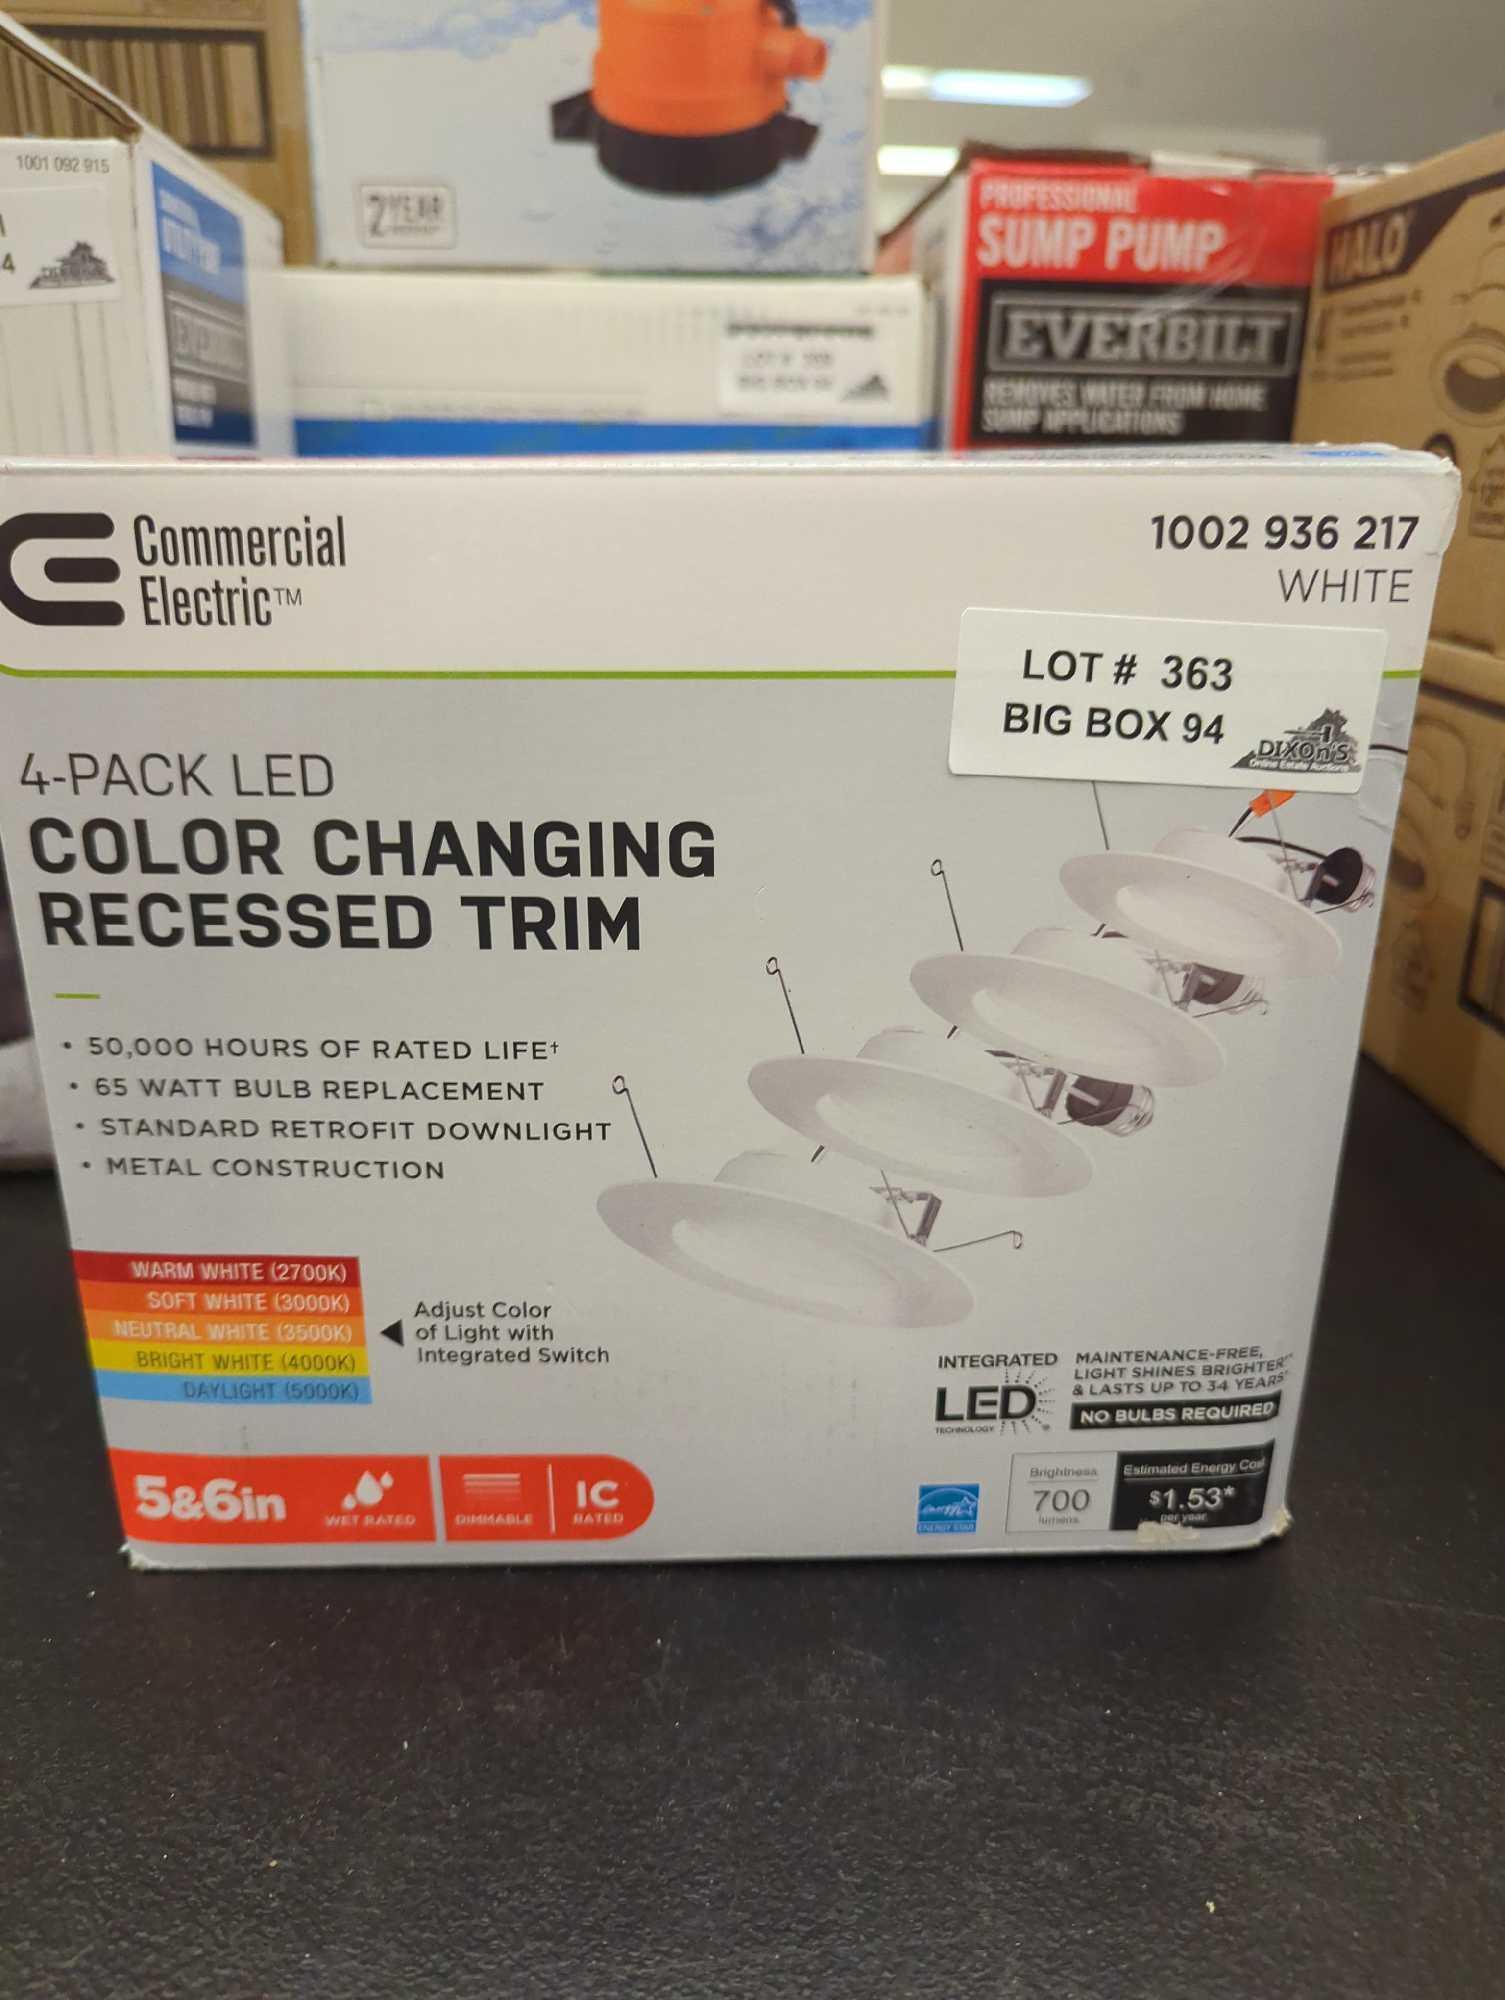 Commercial Electric 5/6 in. Integrated LED White Dimmable Recessed Light Trim with Adjustable Color